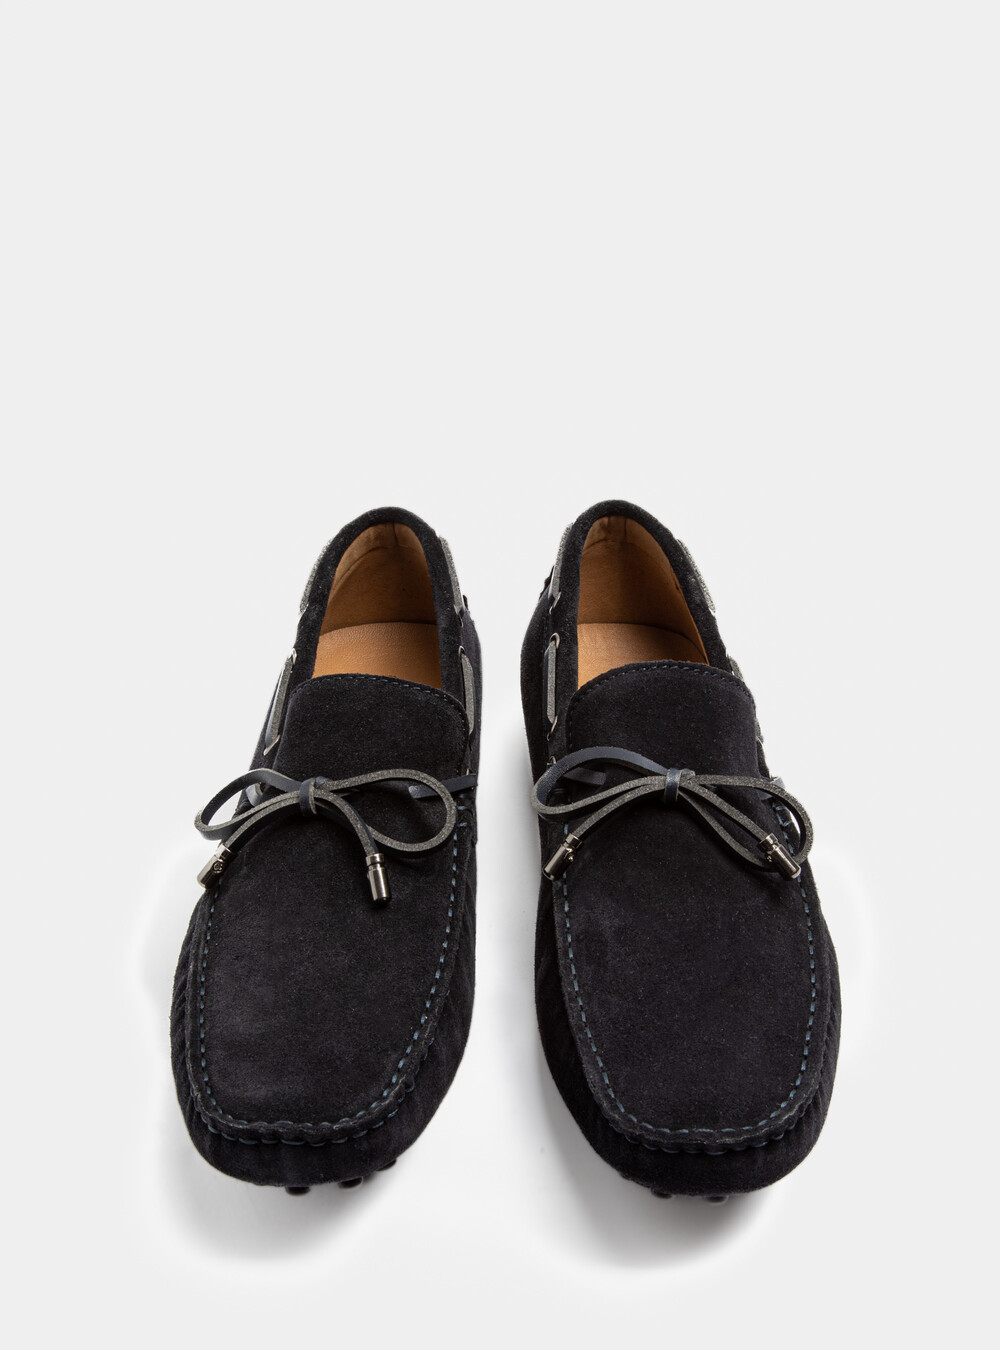 Suede loafers for boats | GutteridgeEU | Shoes Uomo